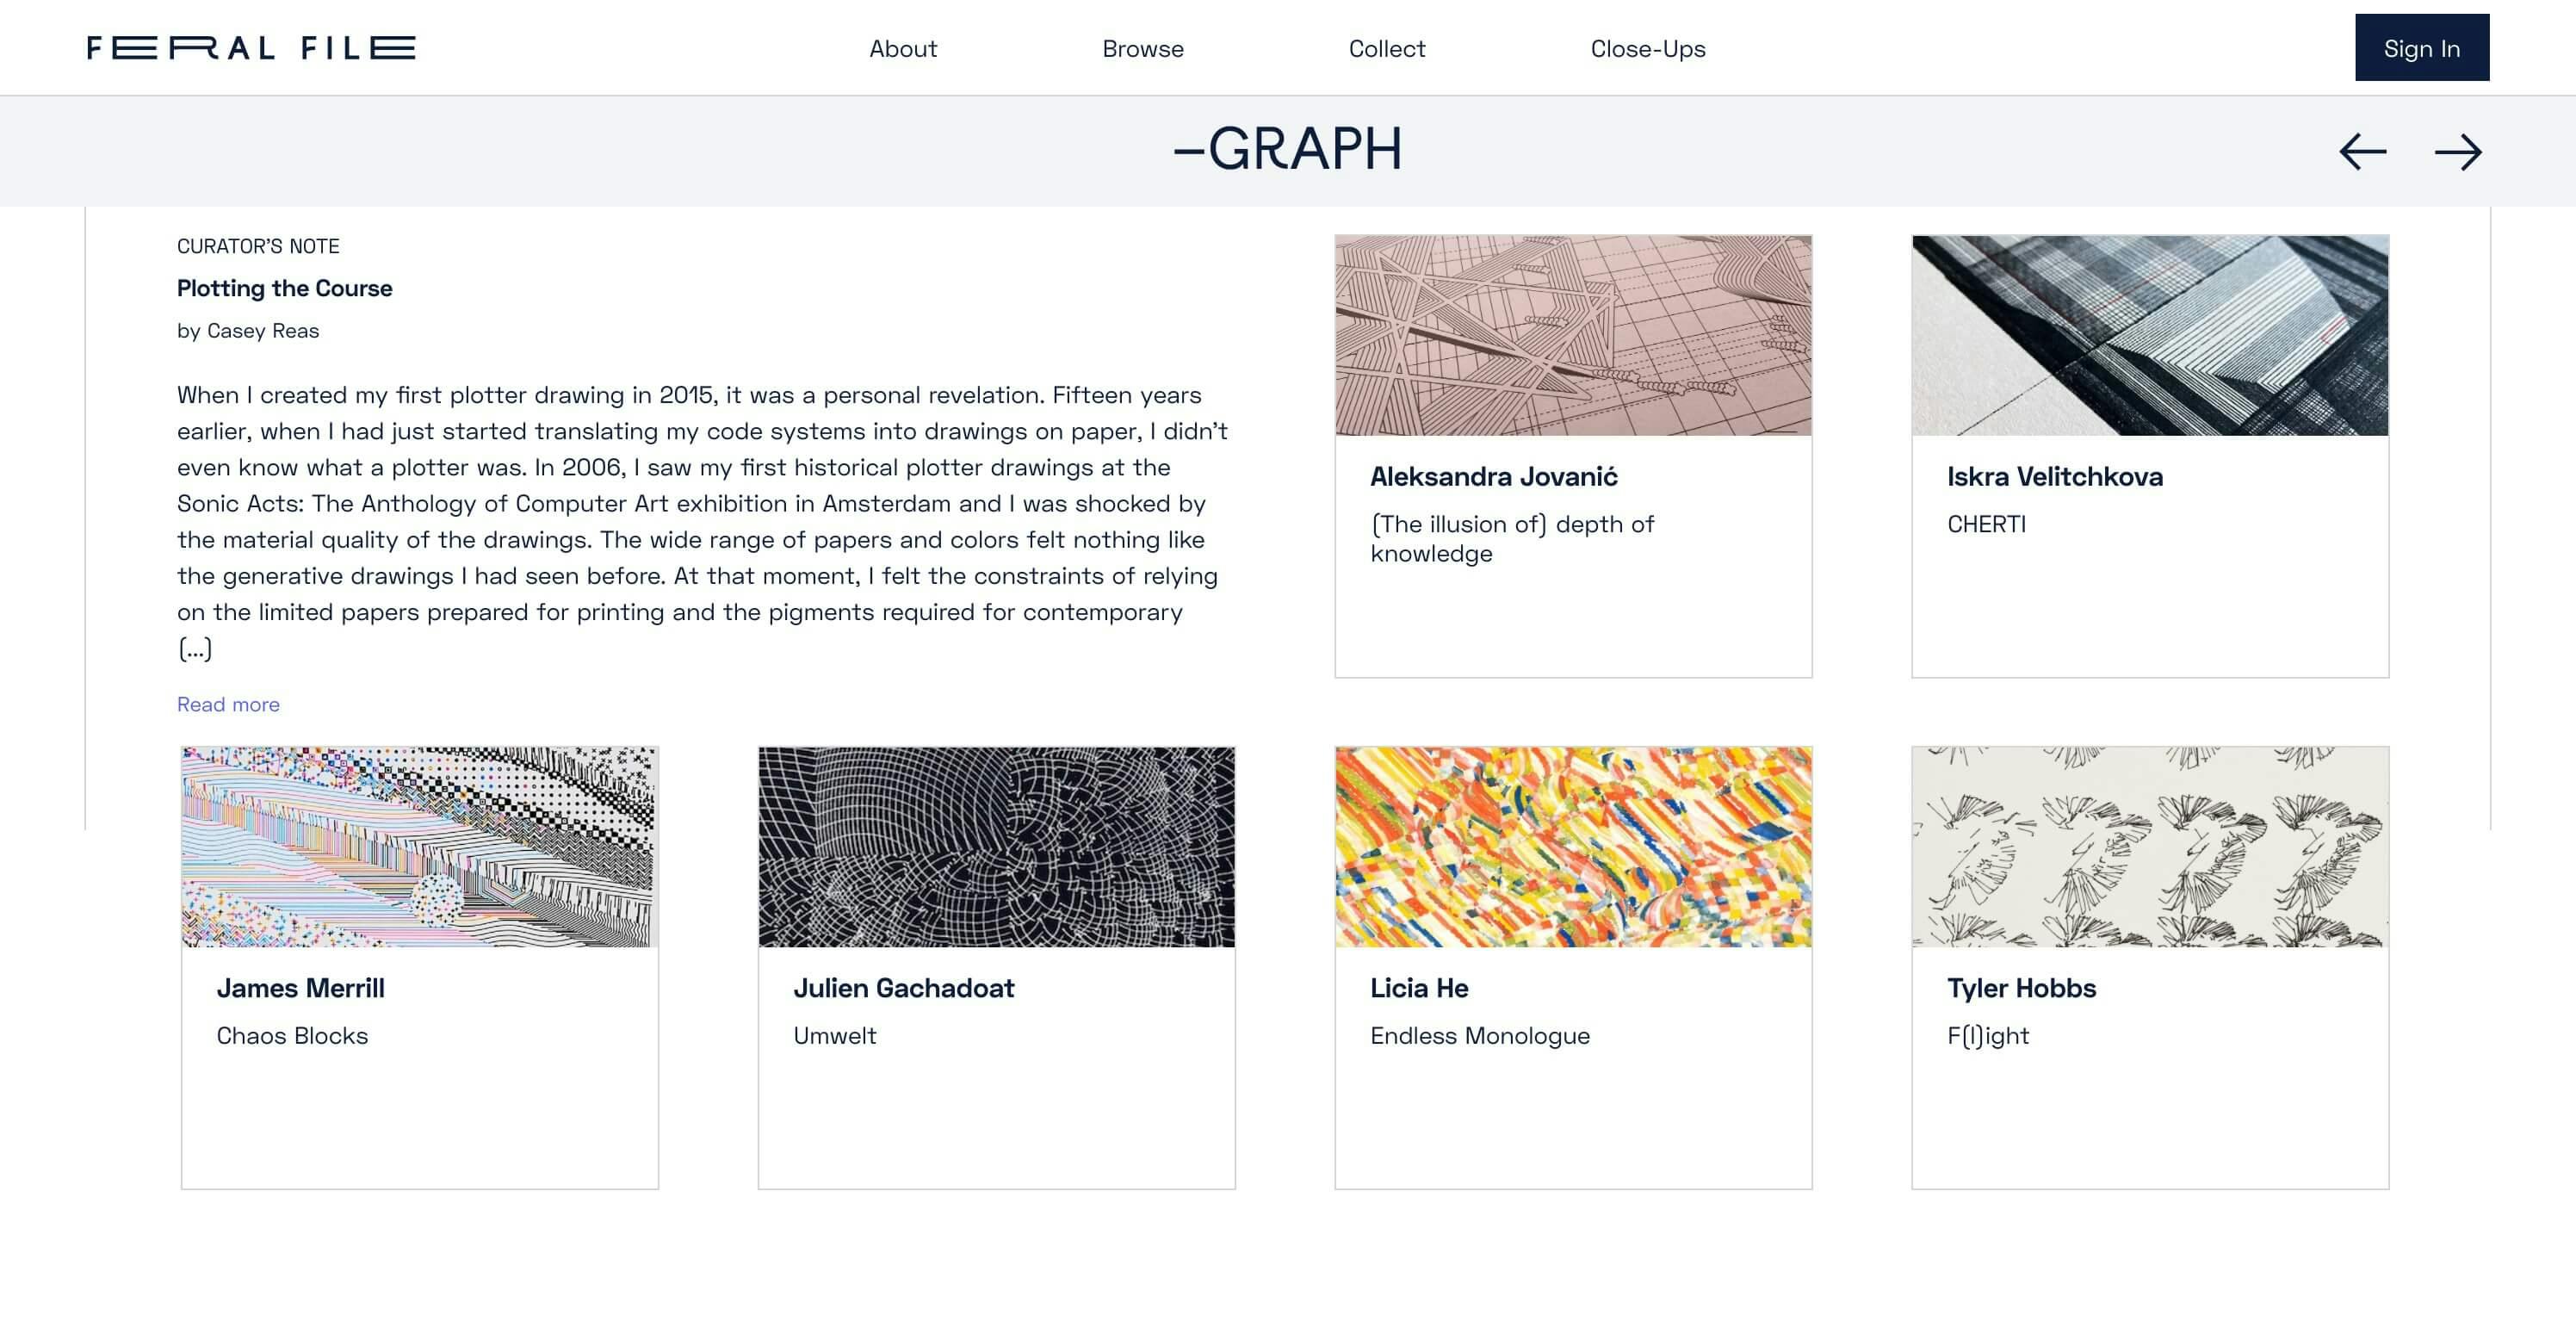 GRAPH — curated by Processing co-founder, Casey Reas (https://feralfile.com/)